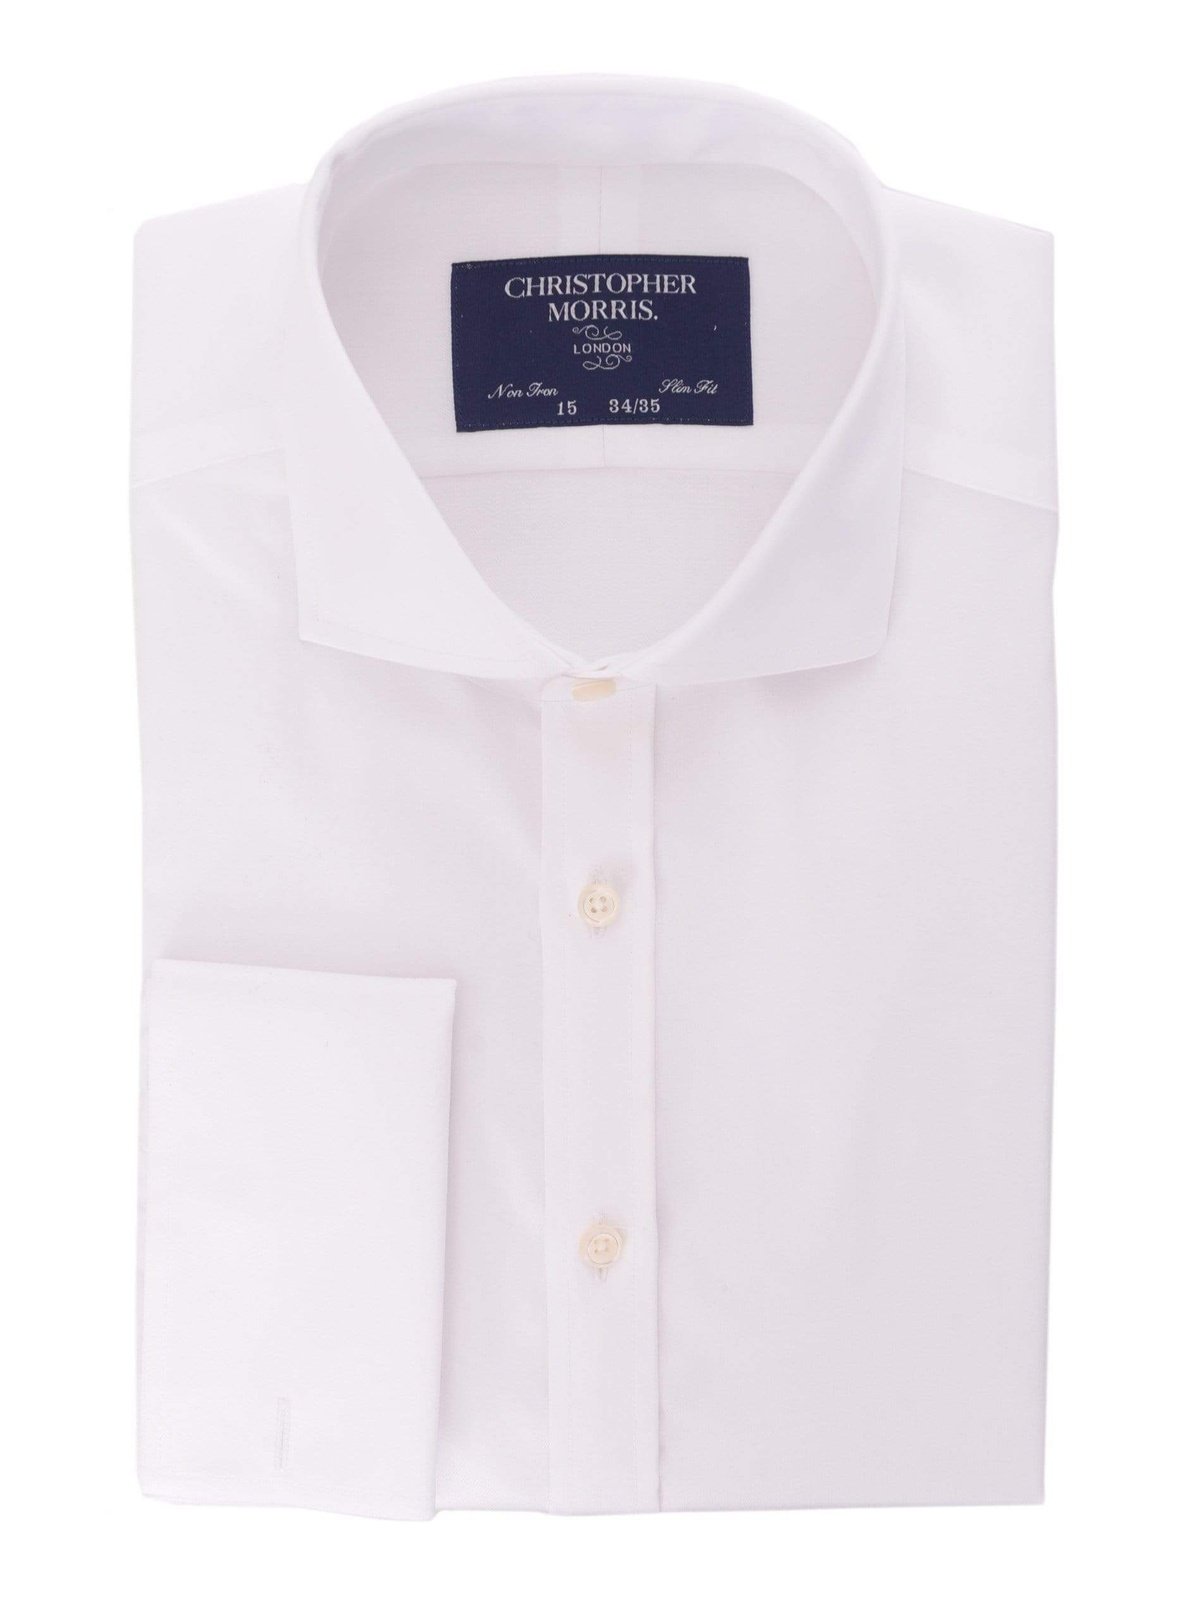 Christopher Morris Bestselling Items 16 34/35 Christopher Morris Men's 100% Cotton Non-Iron White French Cuff Dress Shirt